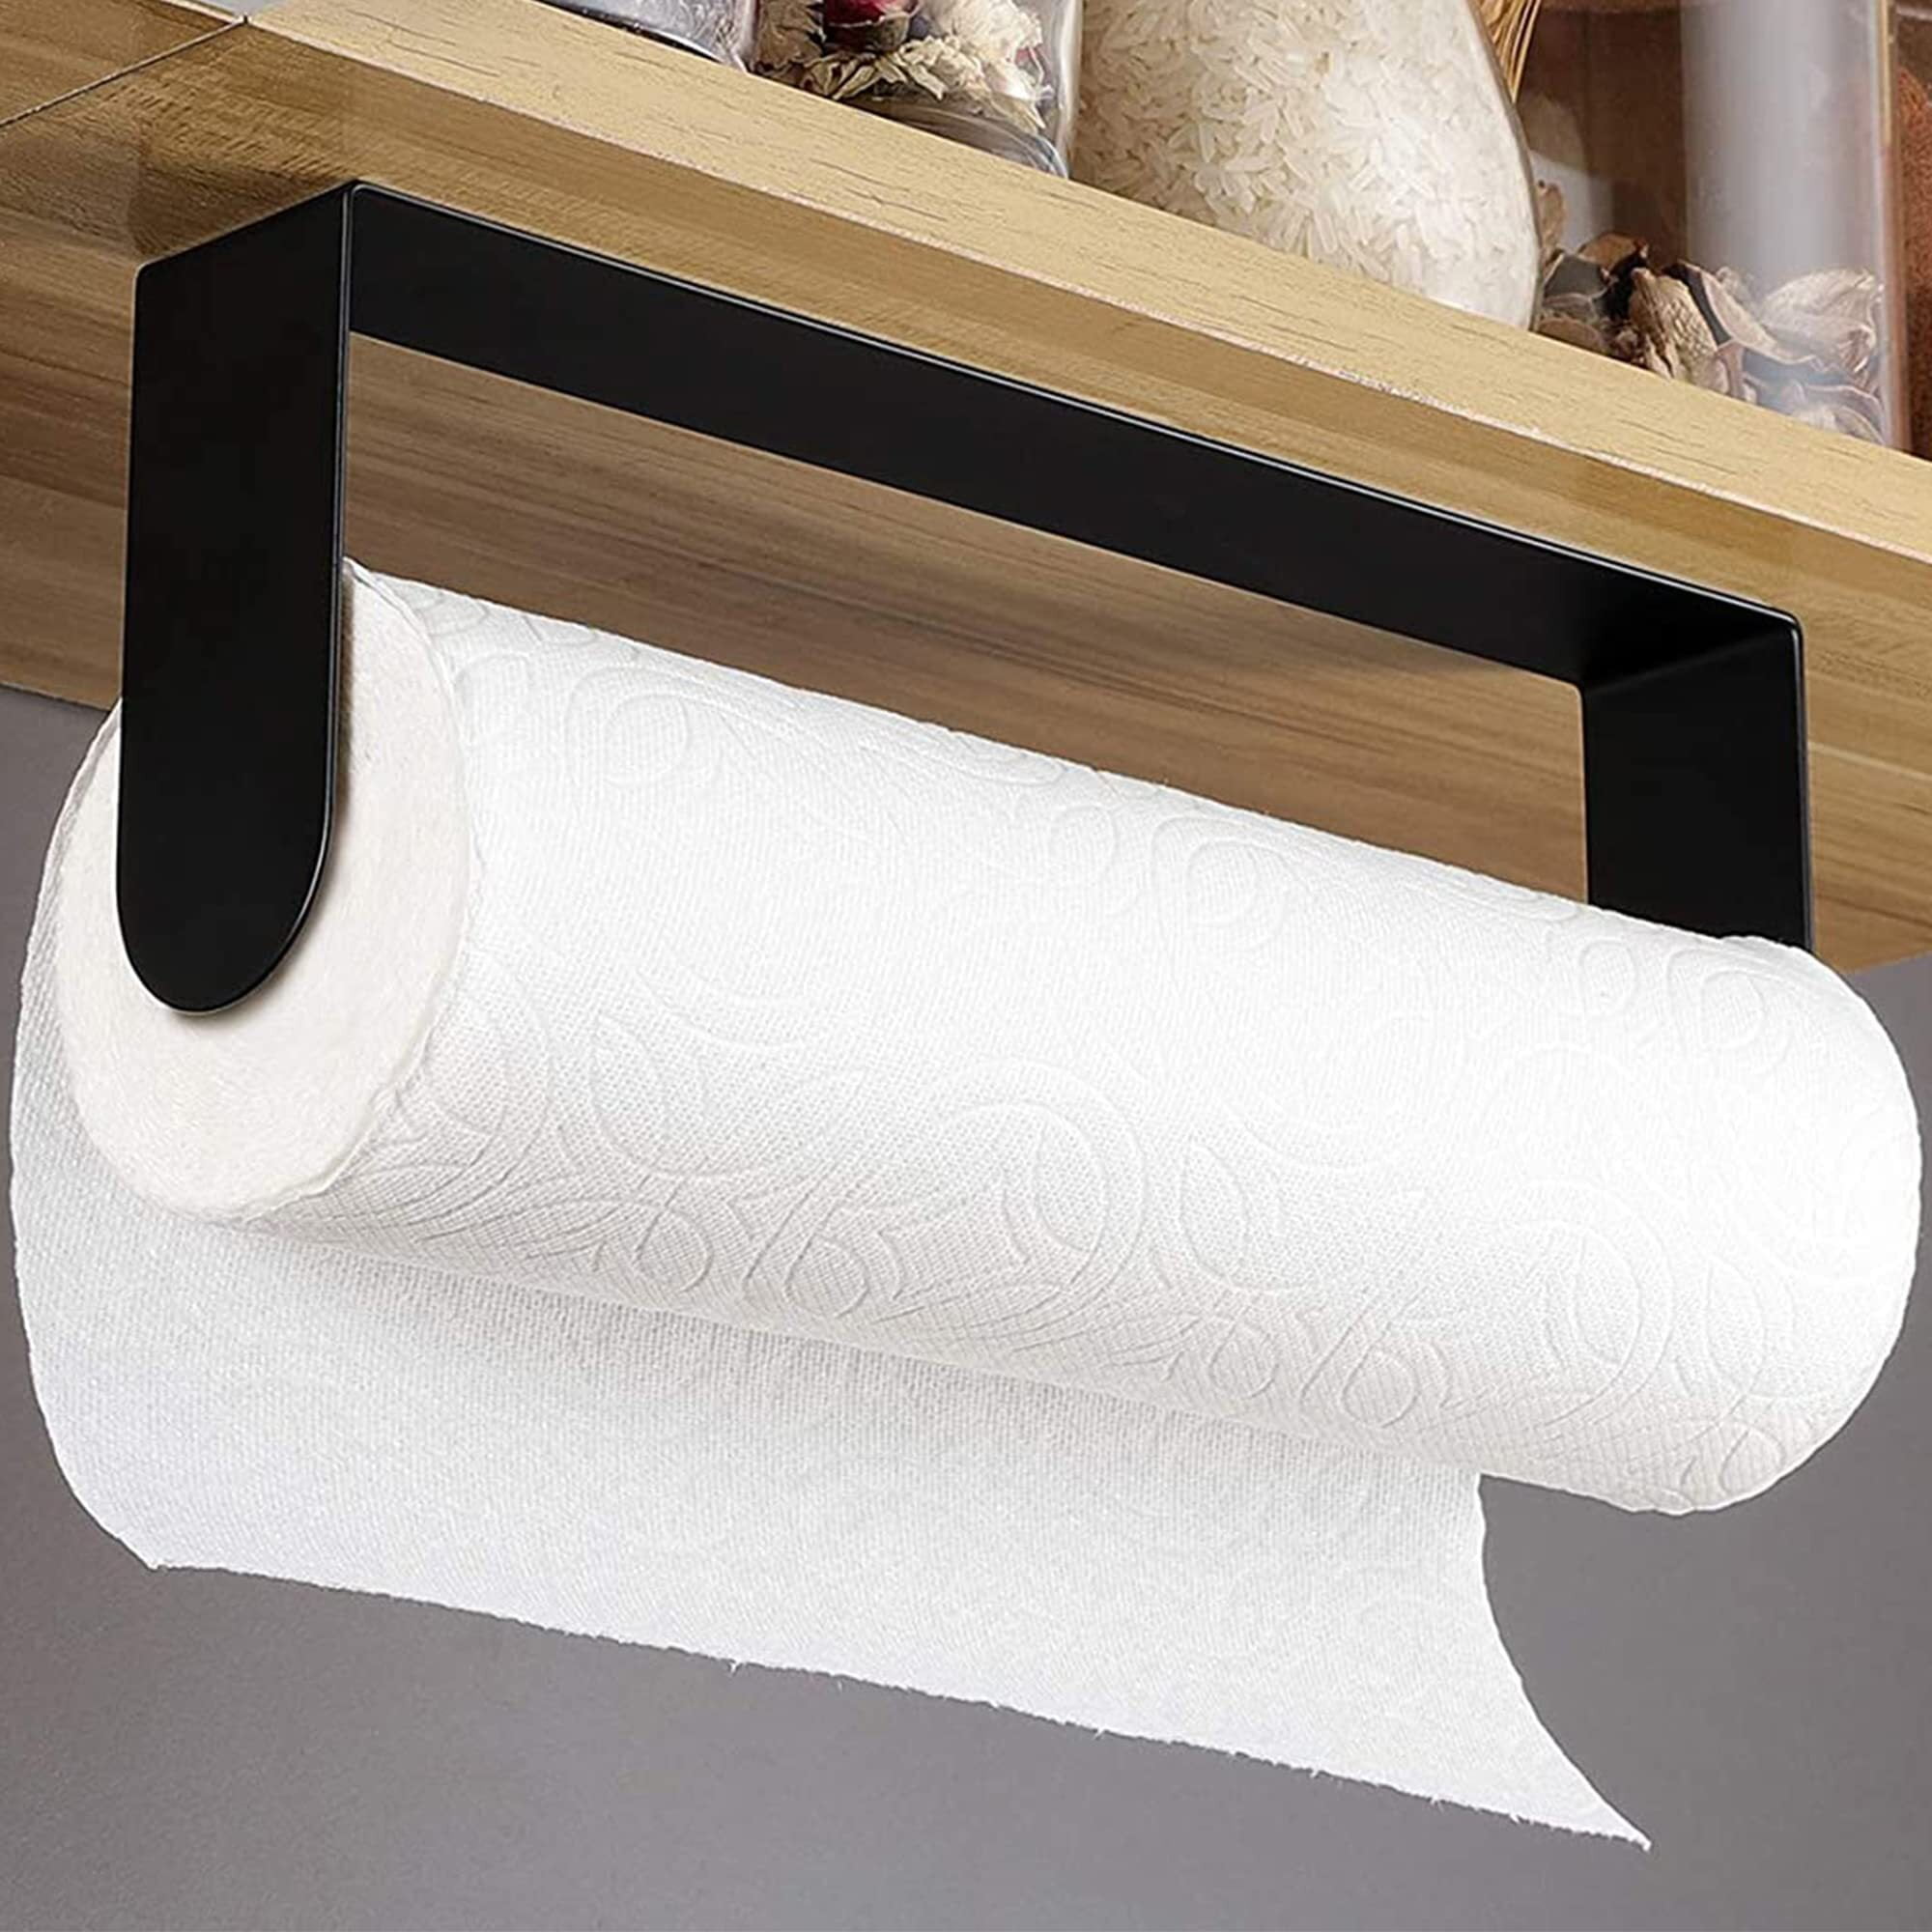 YIGII Paper Towel Holder Wall Mount KH018Y,Rustproof&Waterproof-Limited  Time Promotion🔥 - Tools for Kitchen & Bathroom